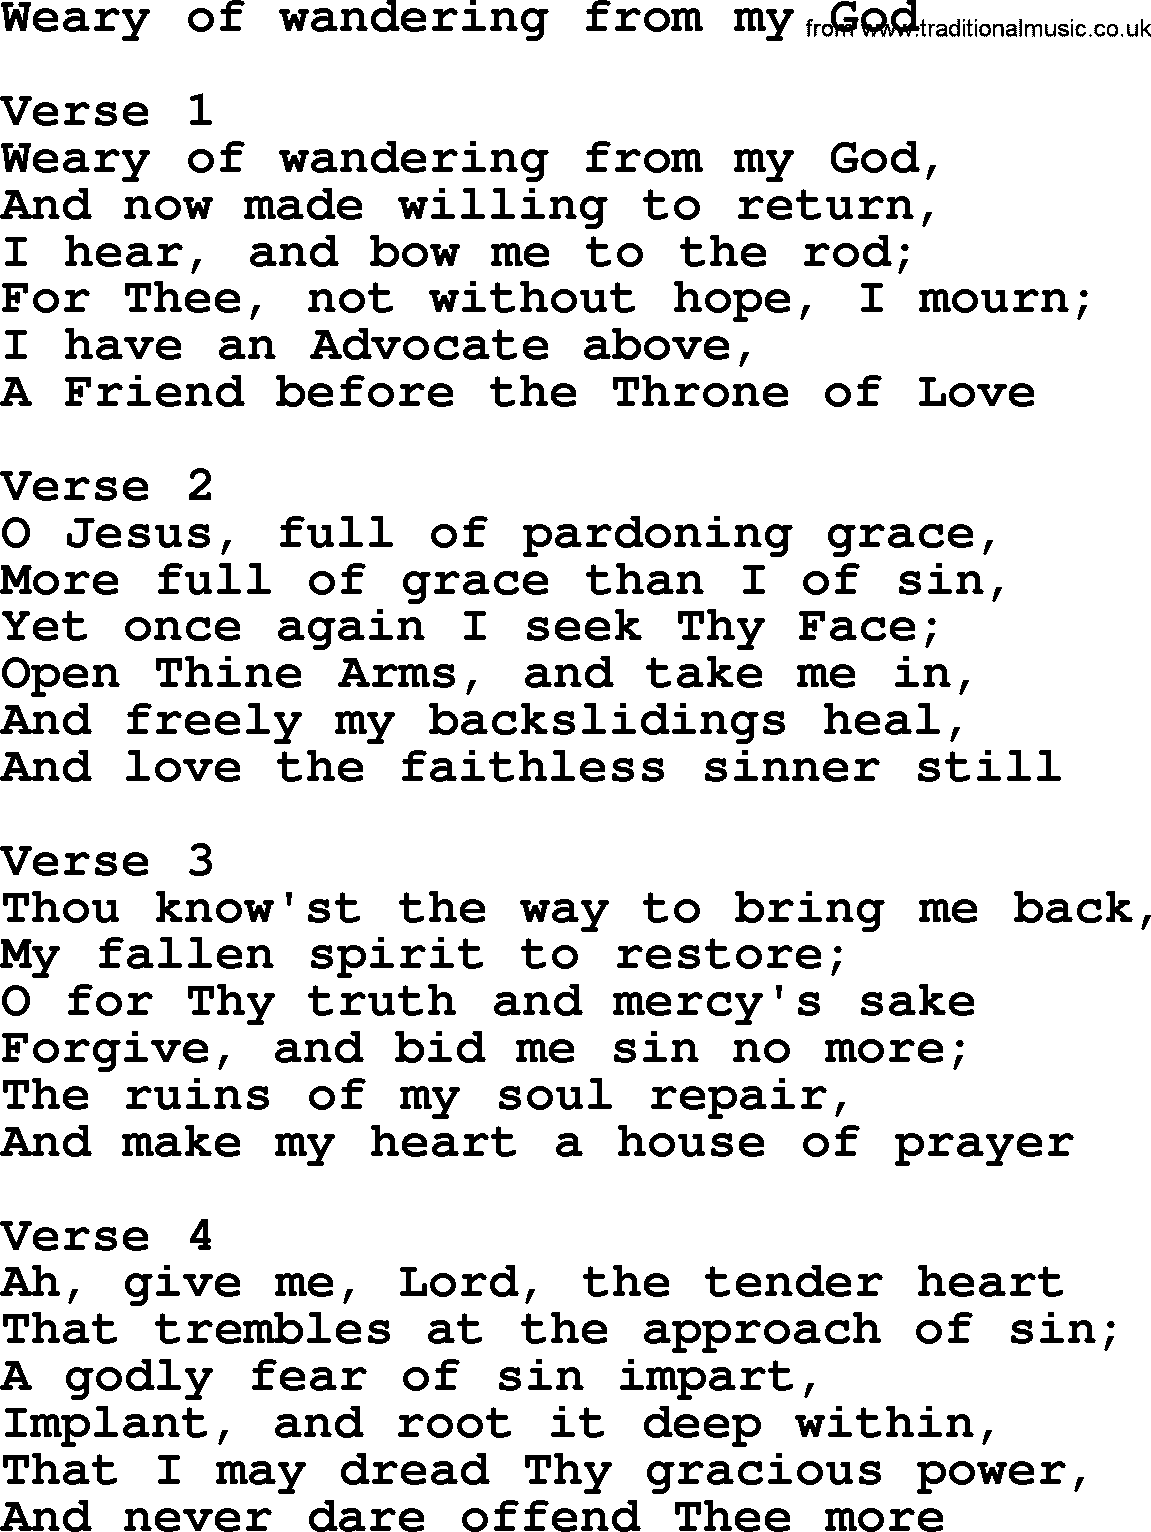 Apostolic and Pentecostal Hymns and Gospel Songs, Hymn: Weary Of Wandering From My God, Christian lyrics and PDF